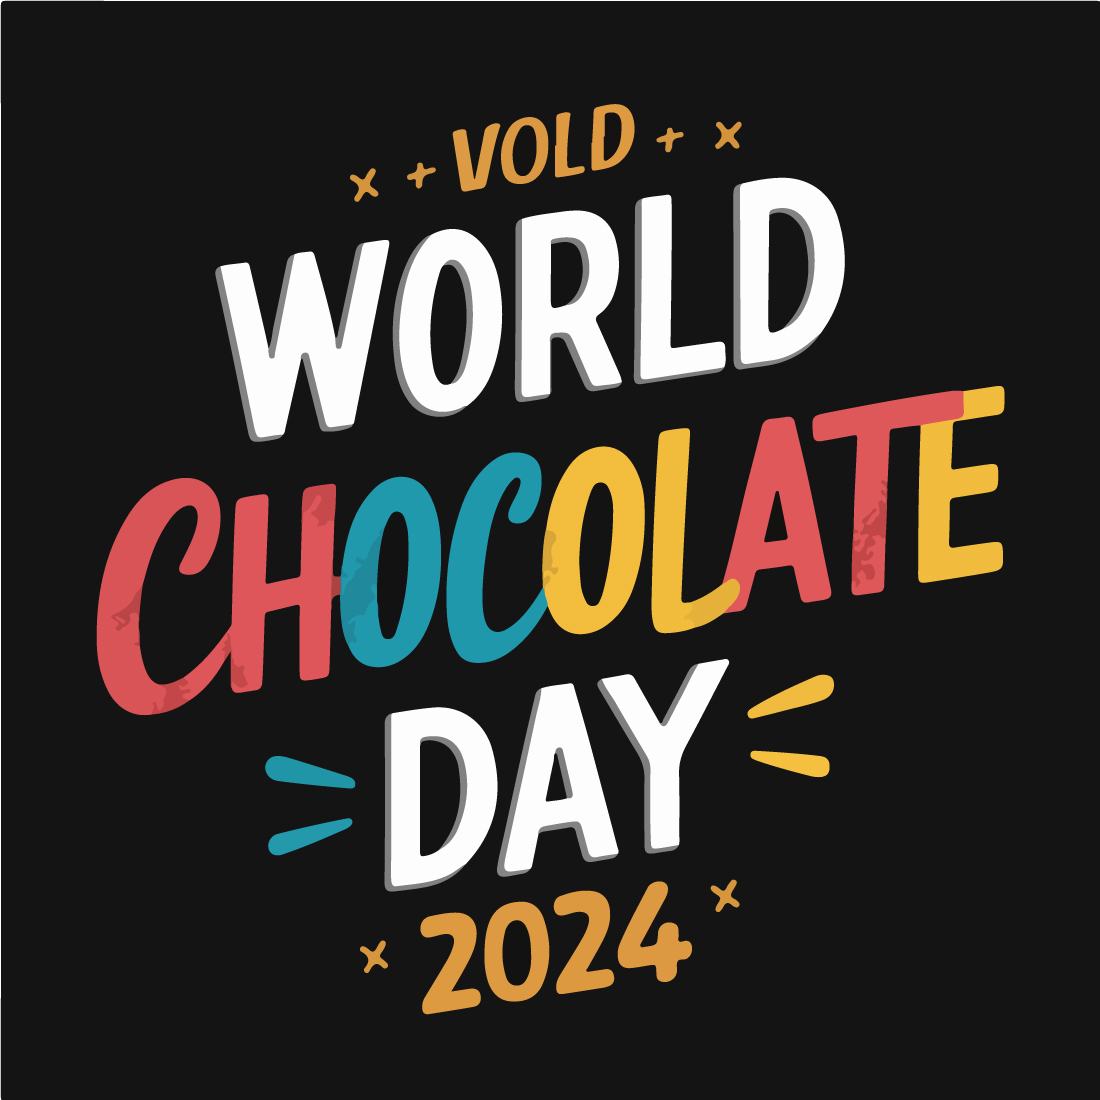 World Chocolate Day Celebration Vector Illustration preview image.